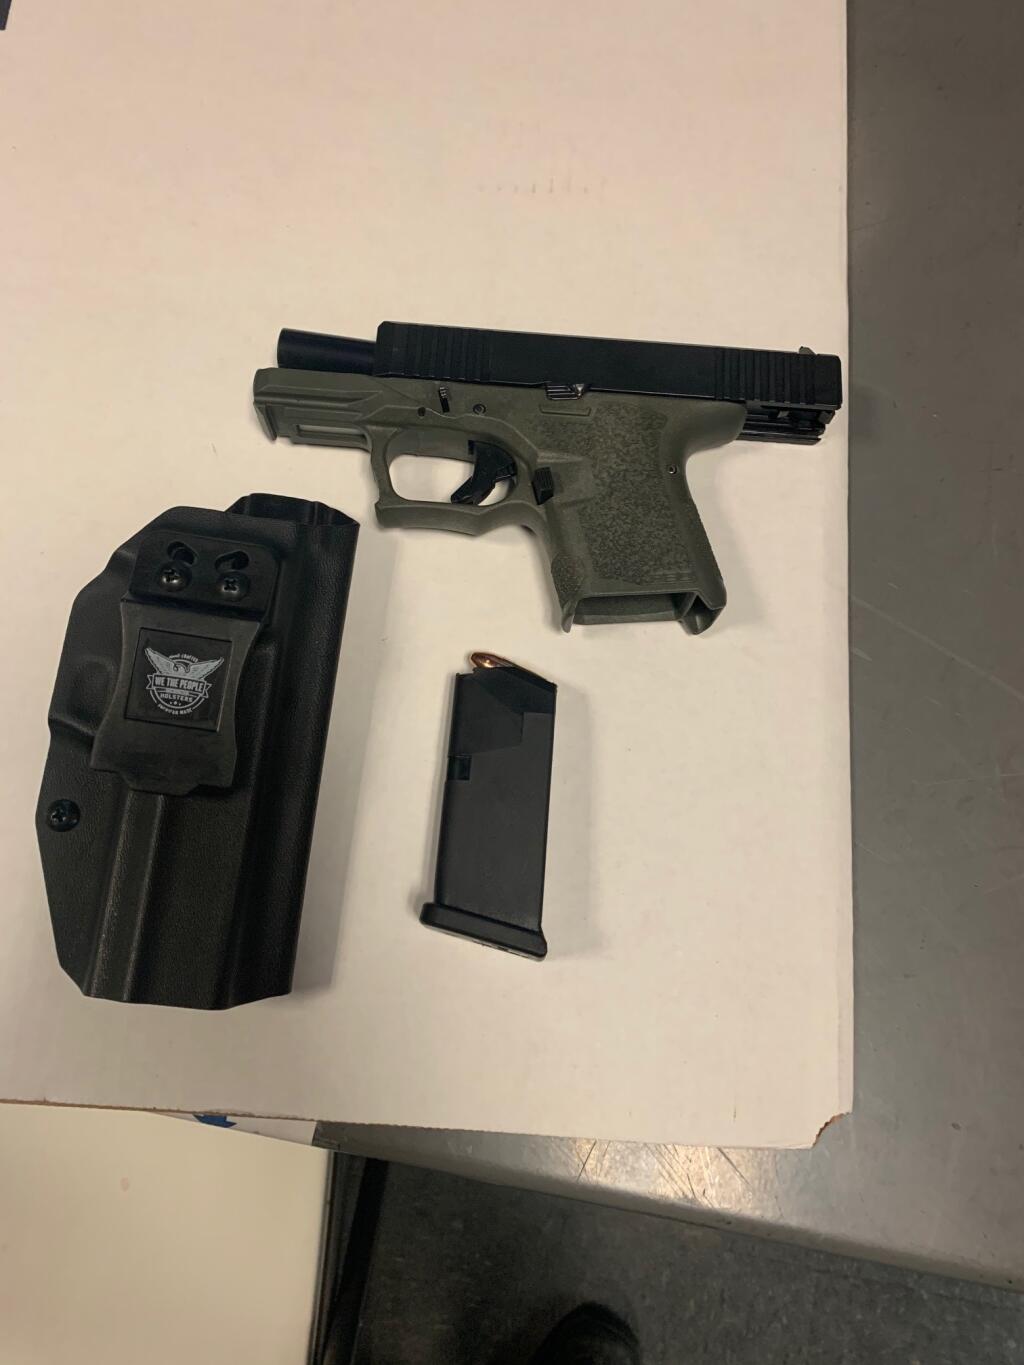 A loaded, unregistered 9 mm semi-automatic handgun found inside a vehicle Sunday, May 30, 2021 by Santa Rosa police. (Courtesy Santa Rosa Police Department)